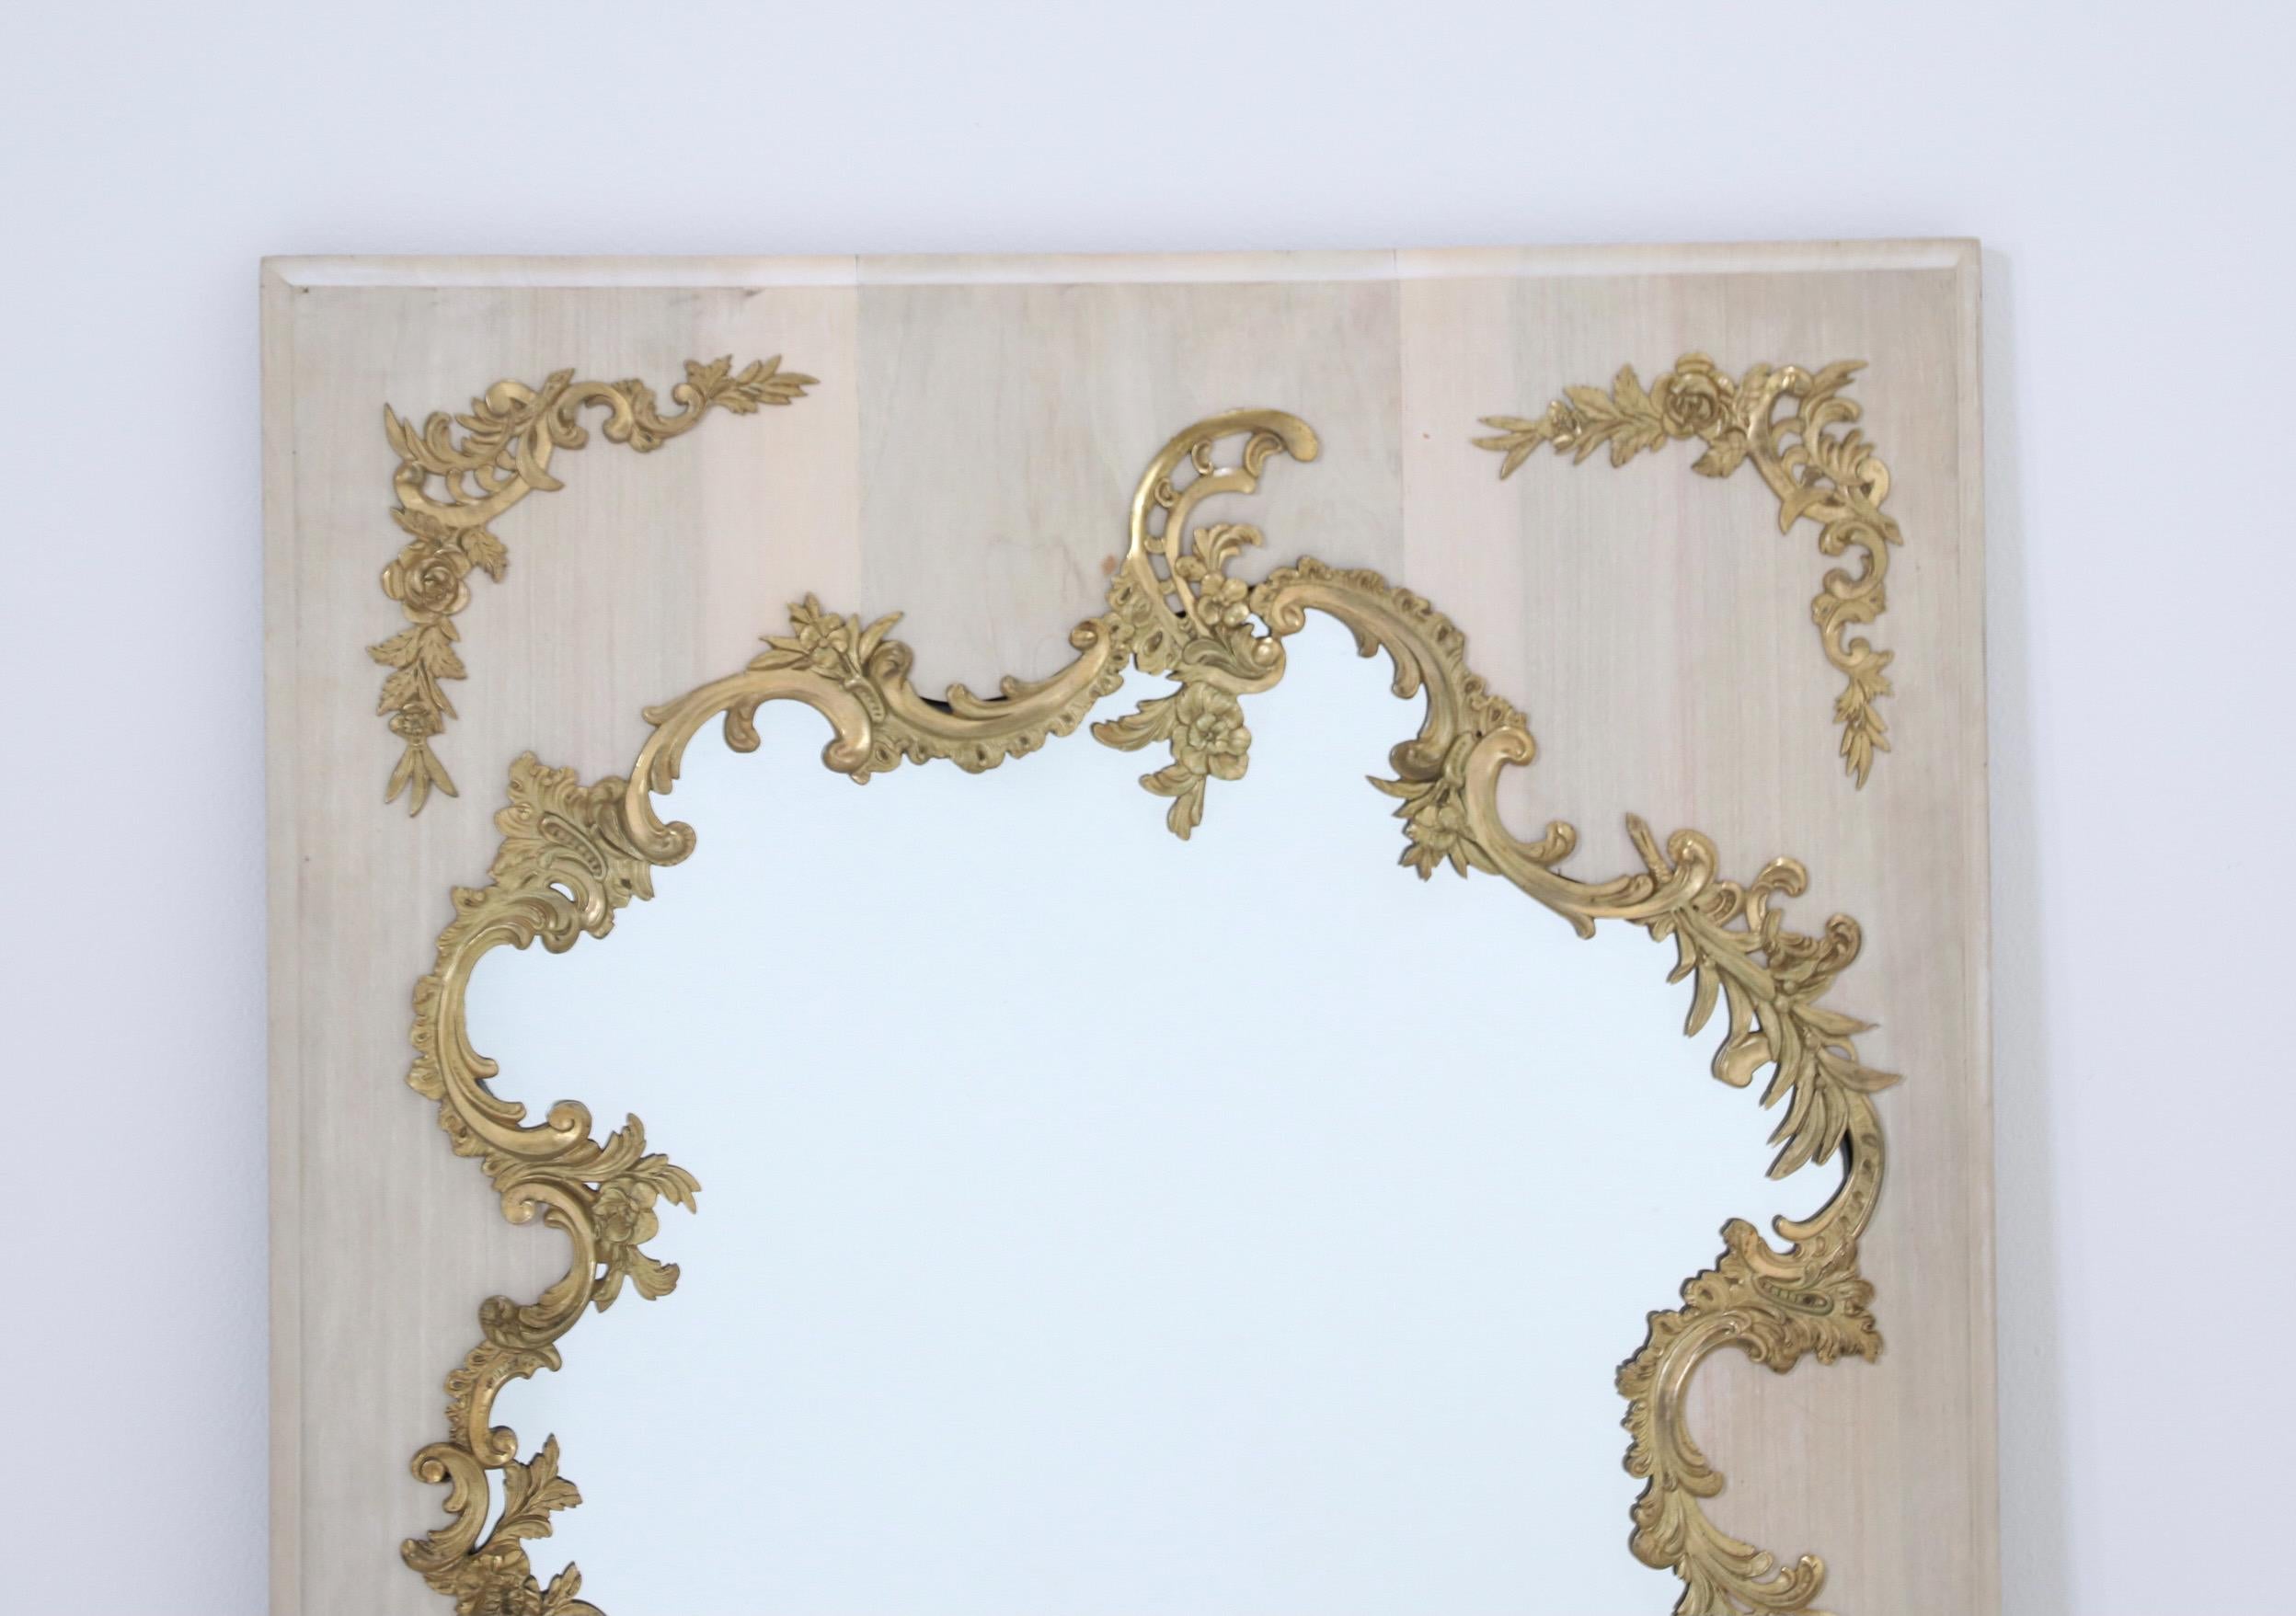 Gorgeous, antique 19th century Louis XV style mirror.

The mirror consists of solid bleached mahogany wood frame with beautifully detailed bronze ormolu decorations. 

